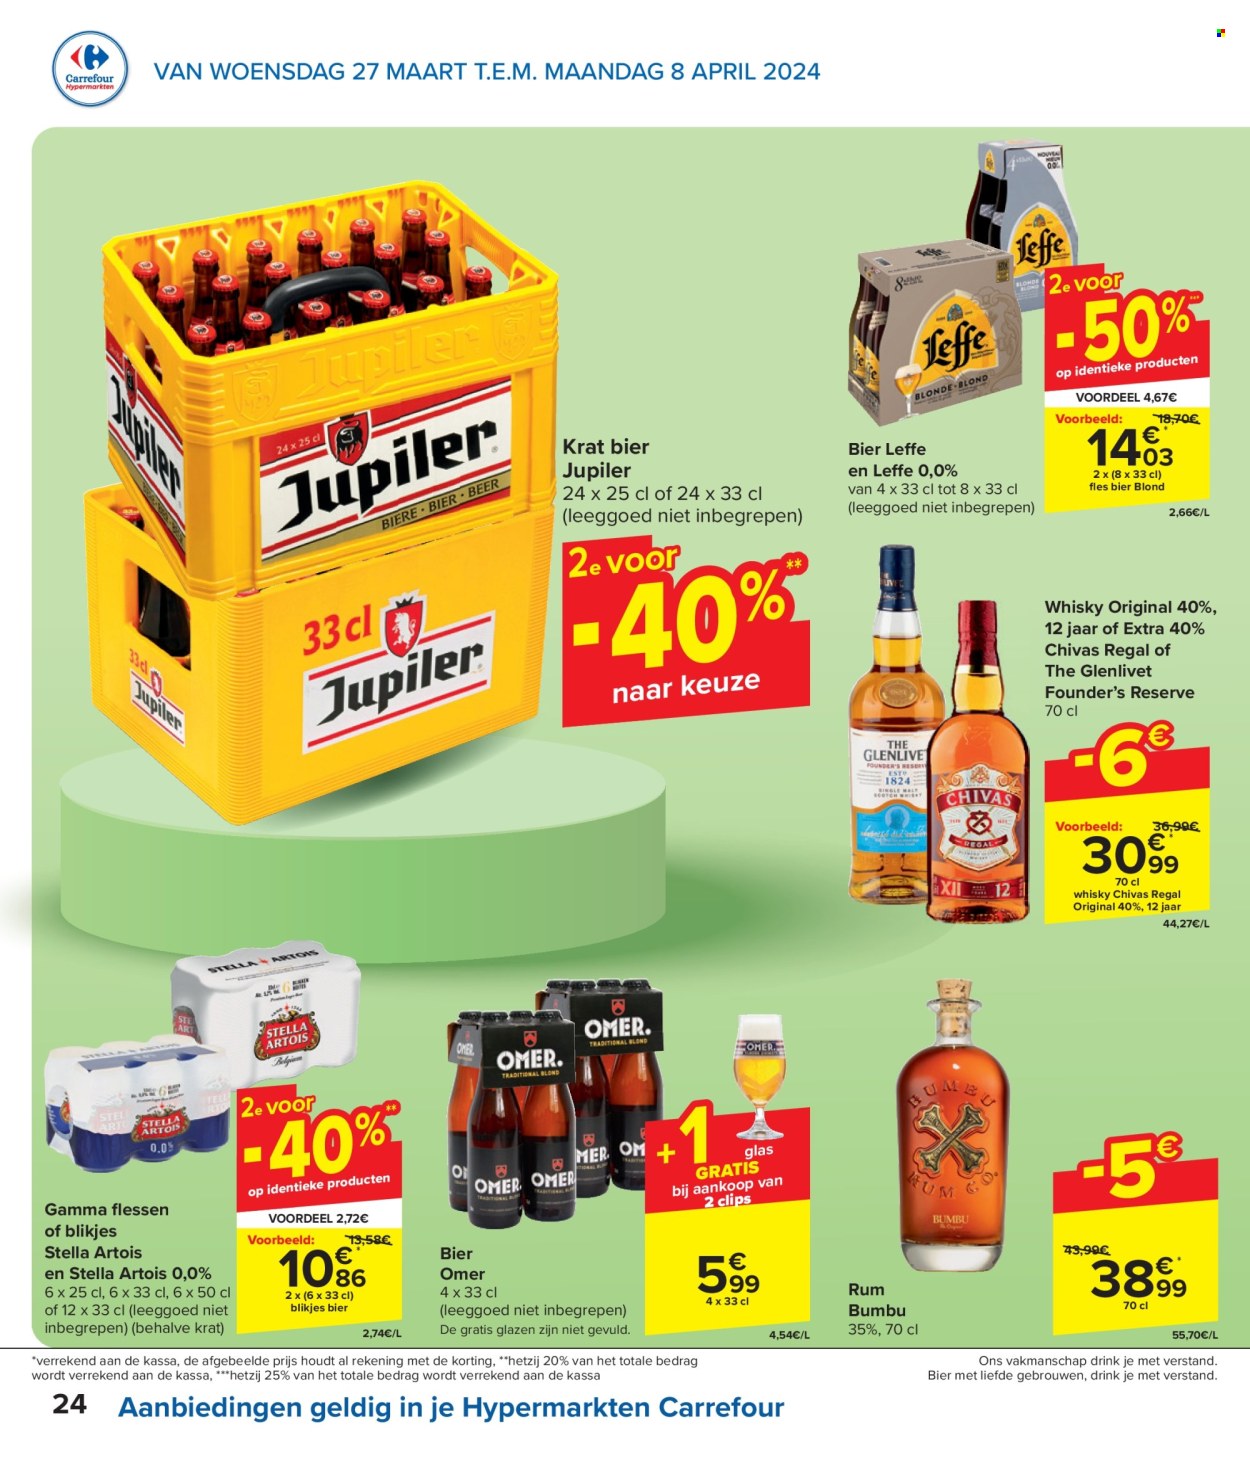 Catalogue Carrefour hypermarkt - 27.3.2024 - 8.4.2024. Page 24.